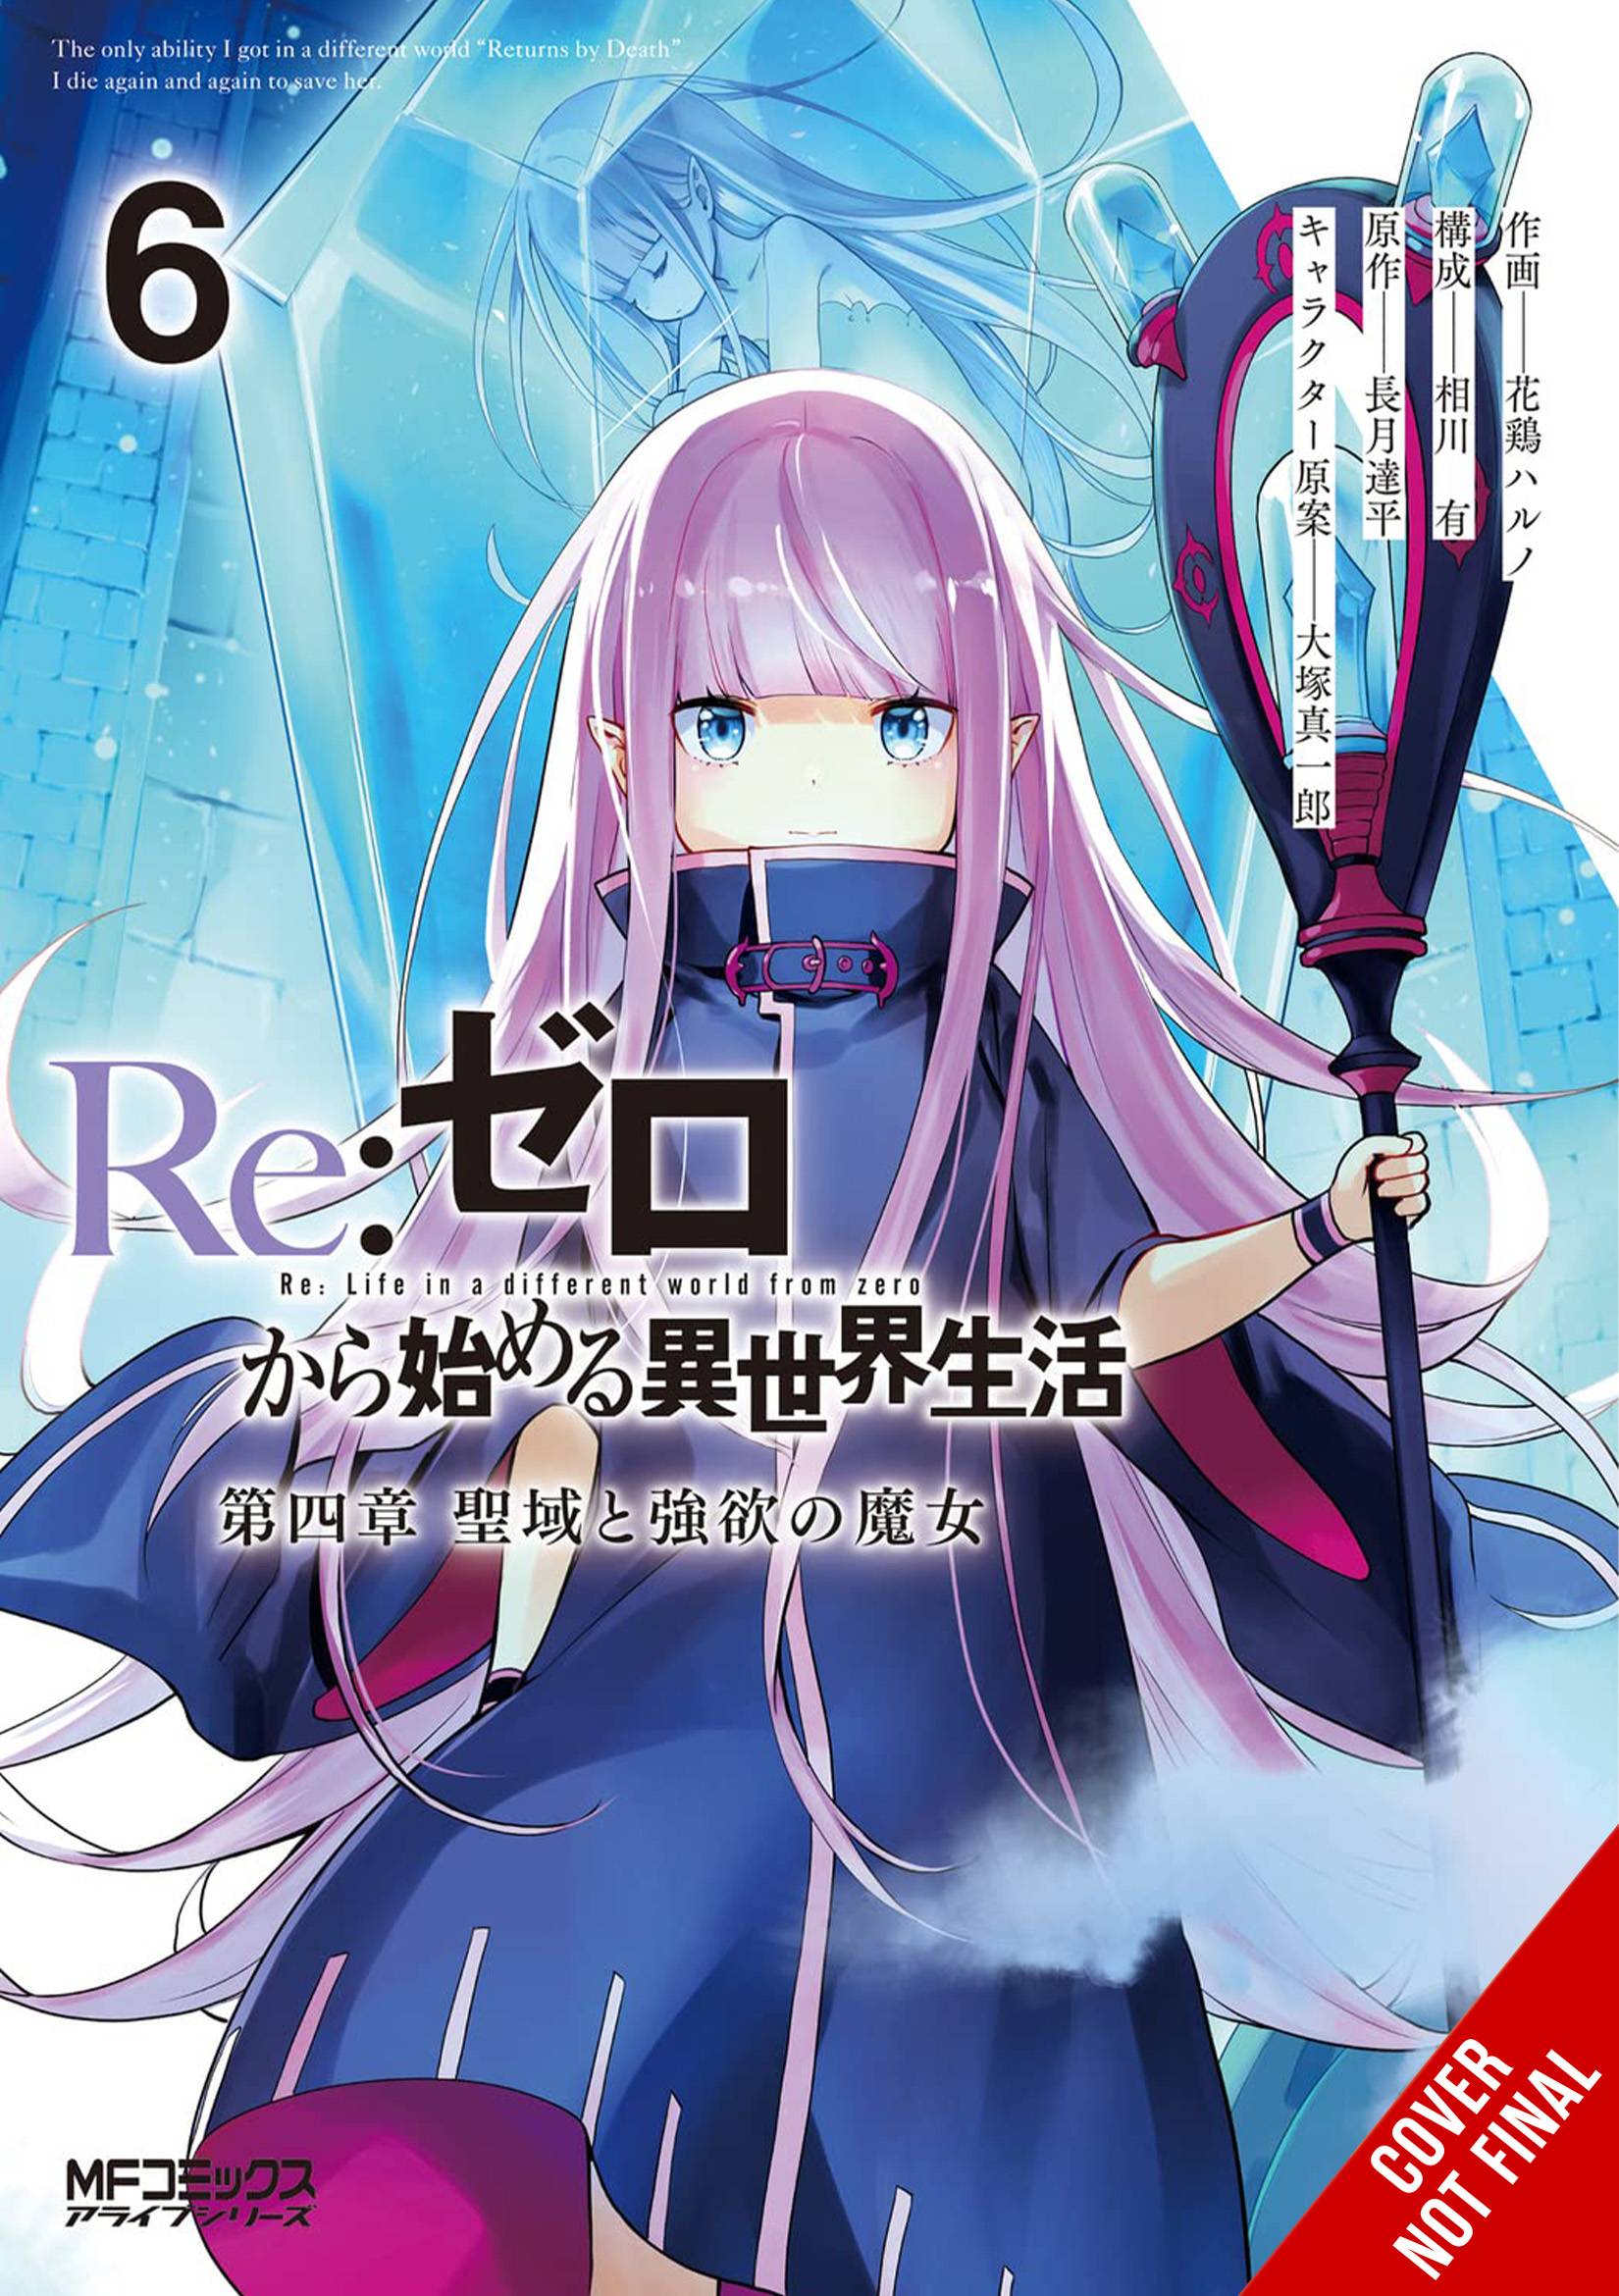 Mar Re Zero Sliaw Chapter Gn Vol Previews World